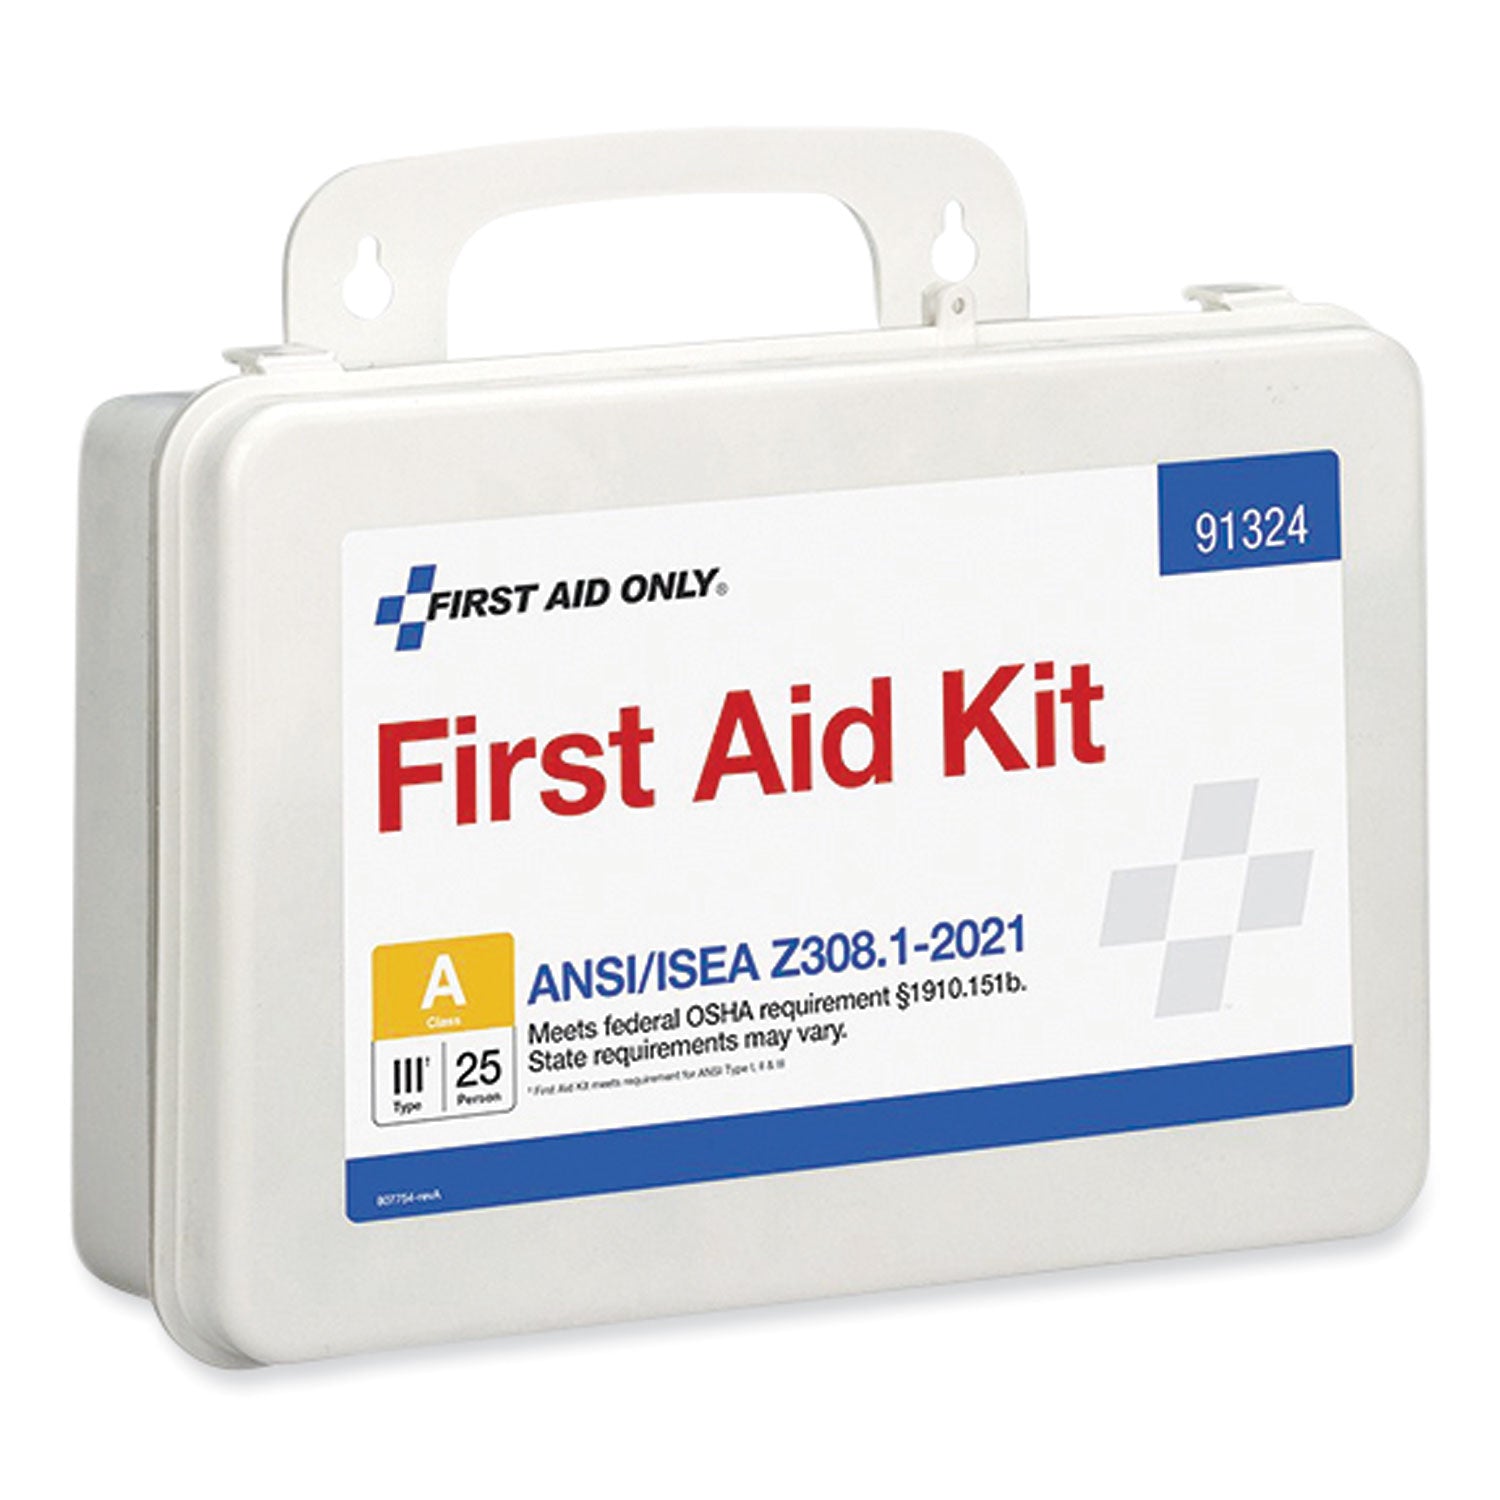 ansi-2021-first-aid-kit-for-25-people-94-pieces-plastic-case_fao91324 - 2